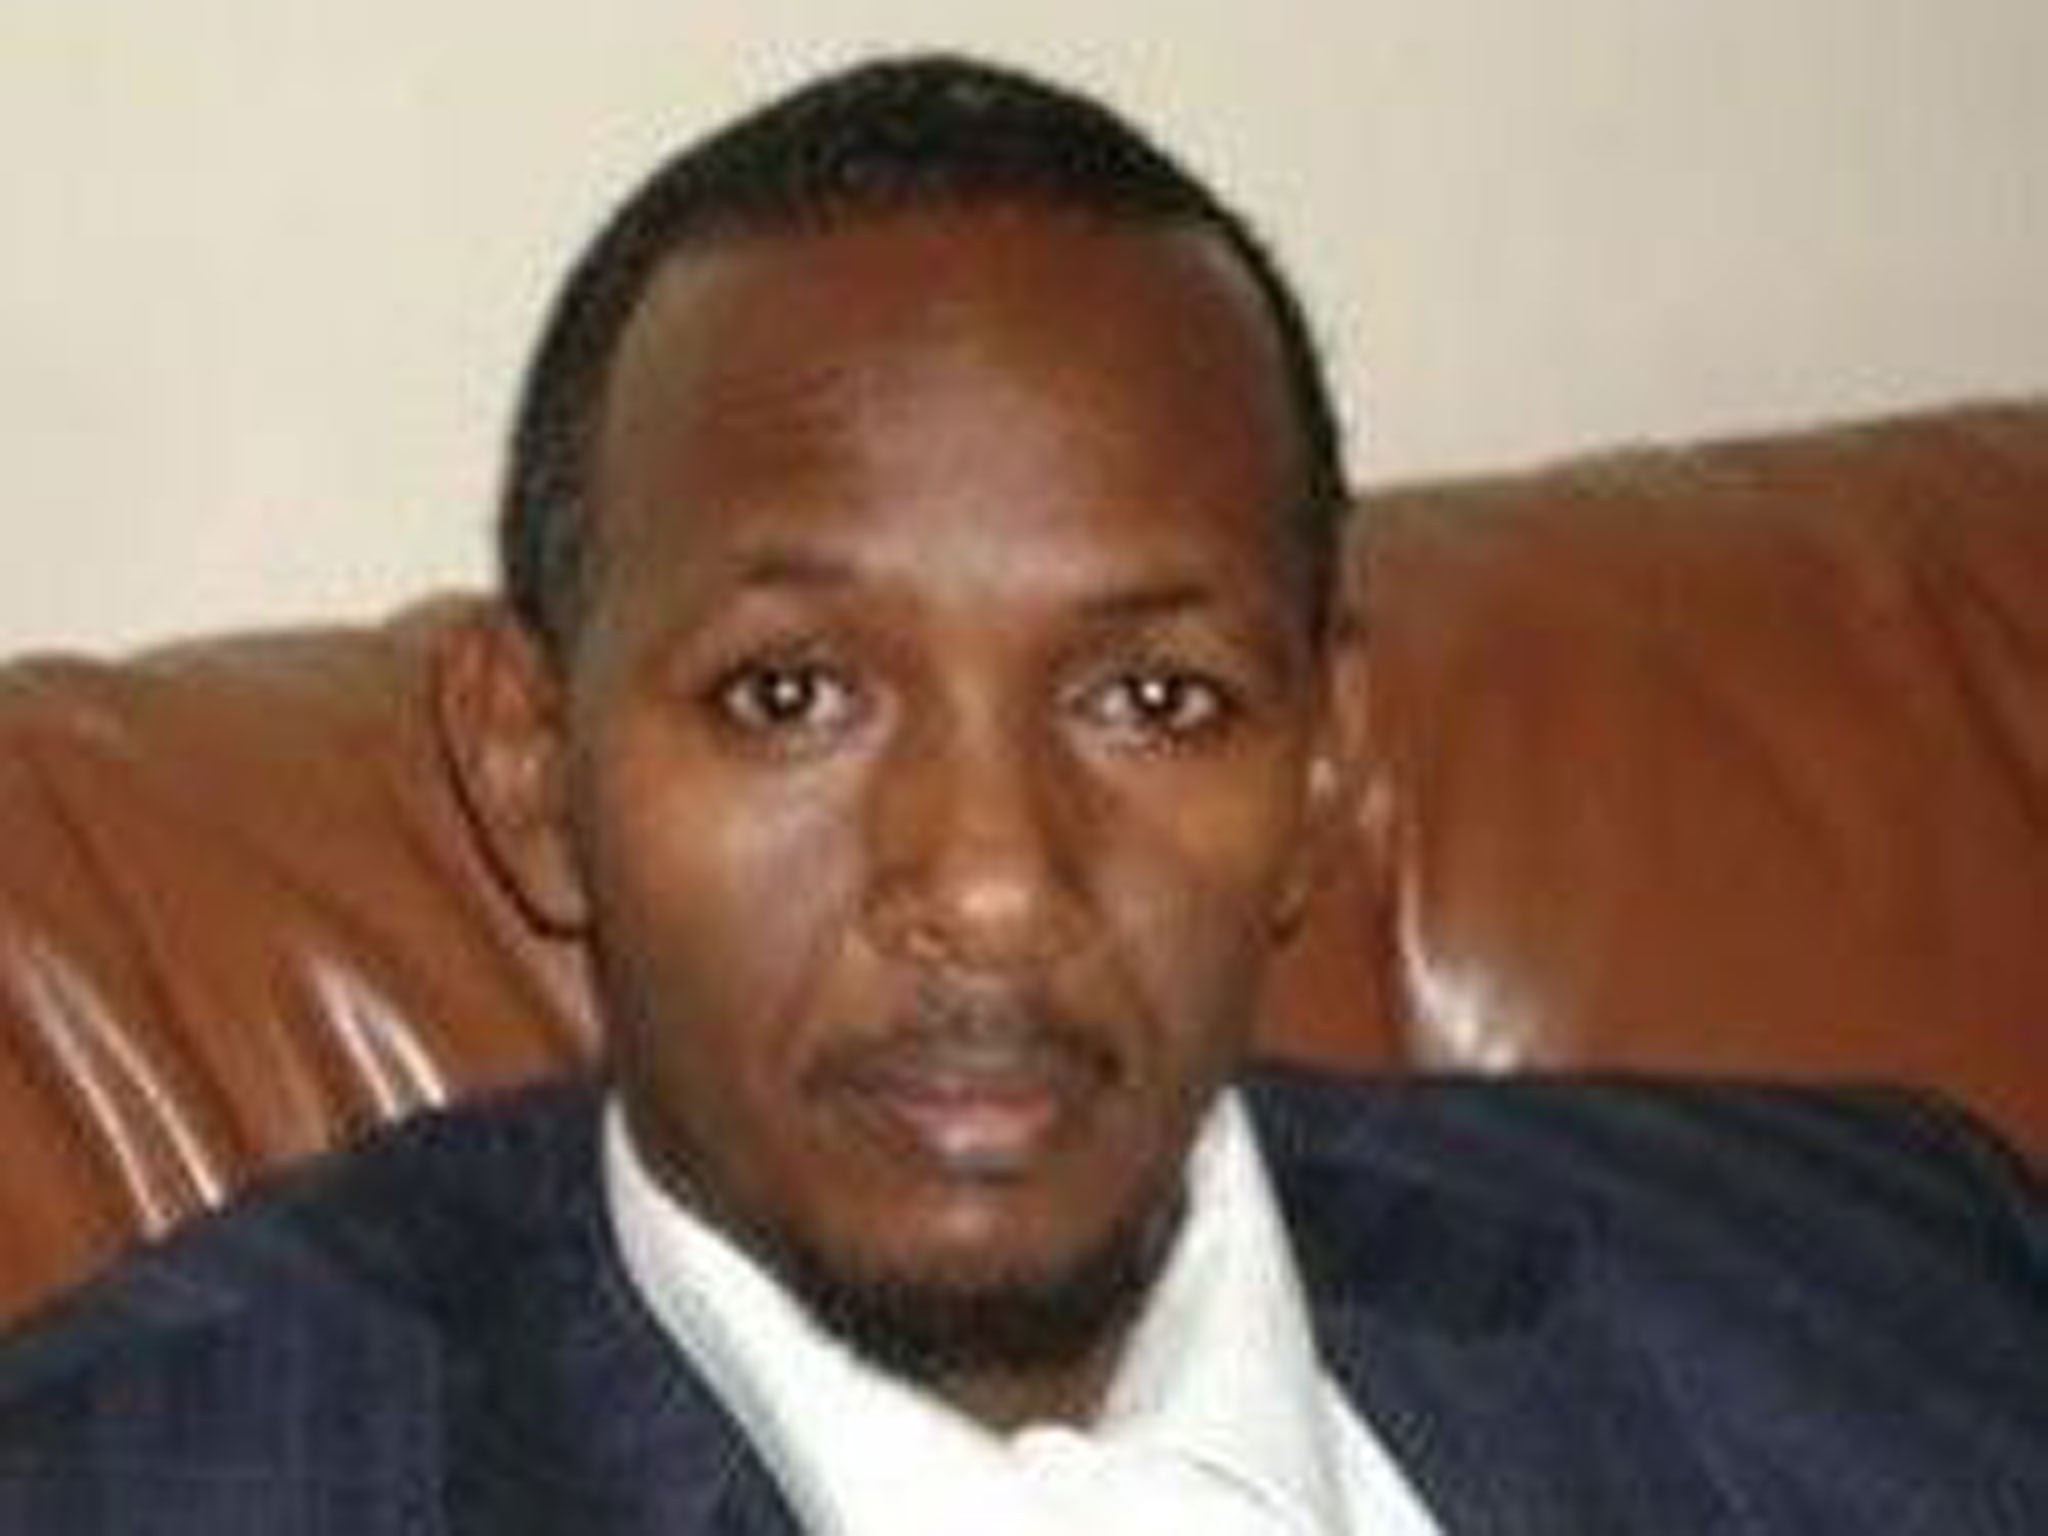 Abdullahi: Stopping this money could push some Somalis into 'desperate measures'